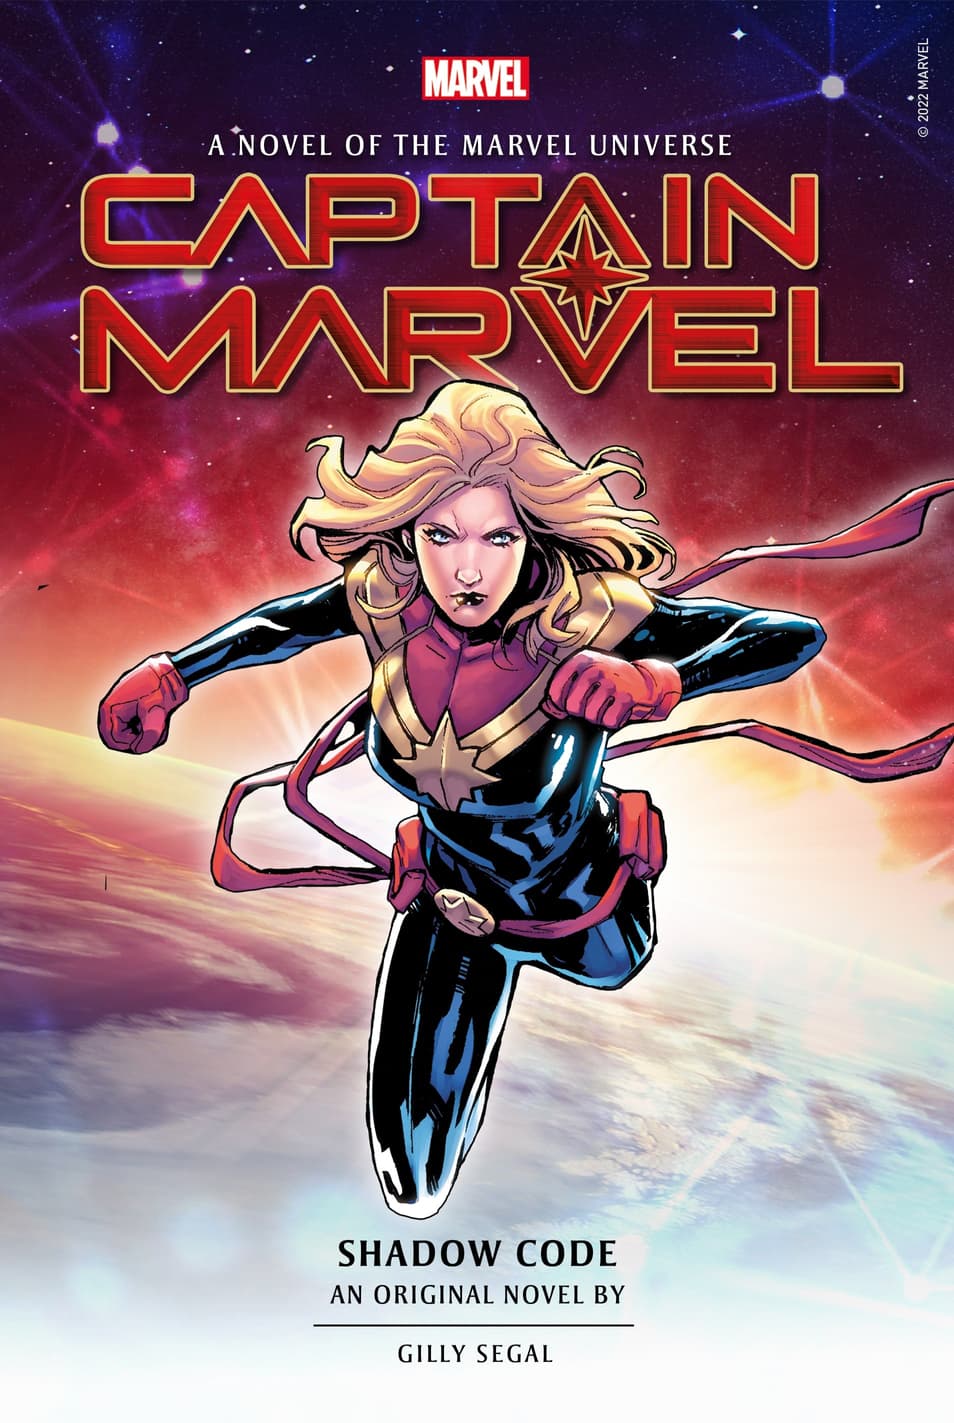 Captain Marvel Faces an Adversary with Unparalleled Power in